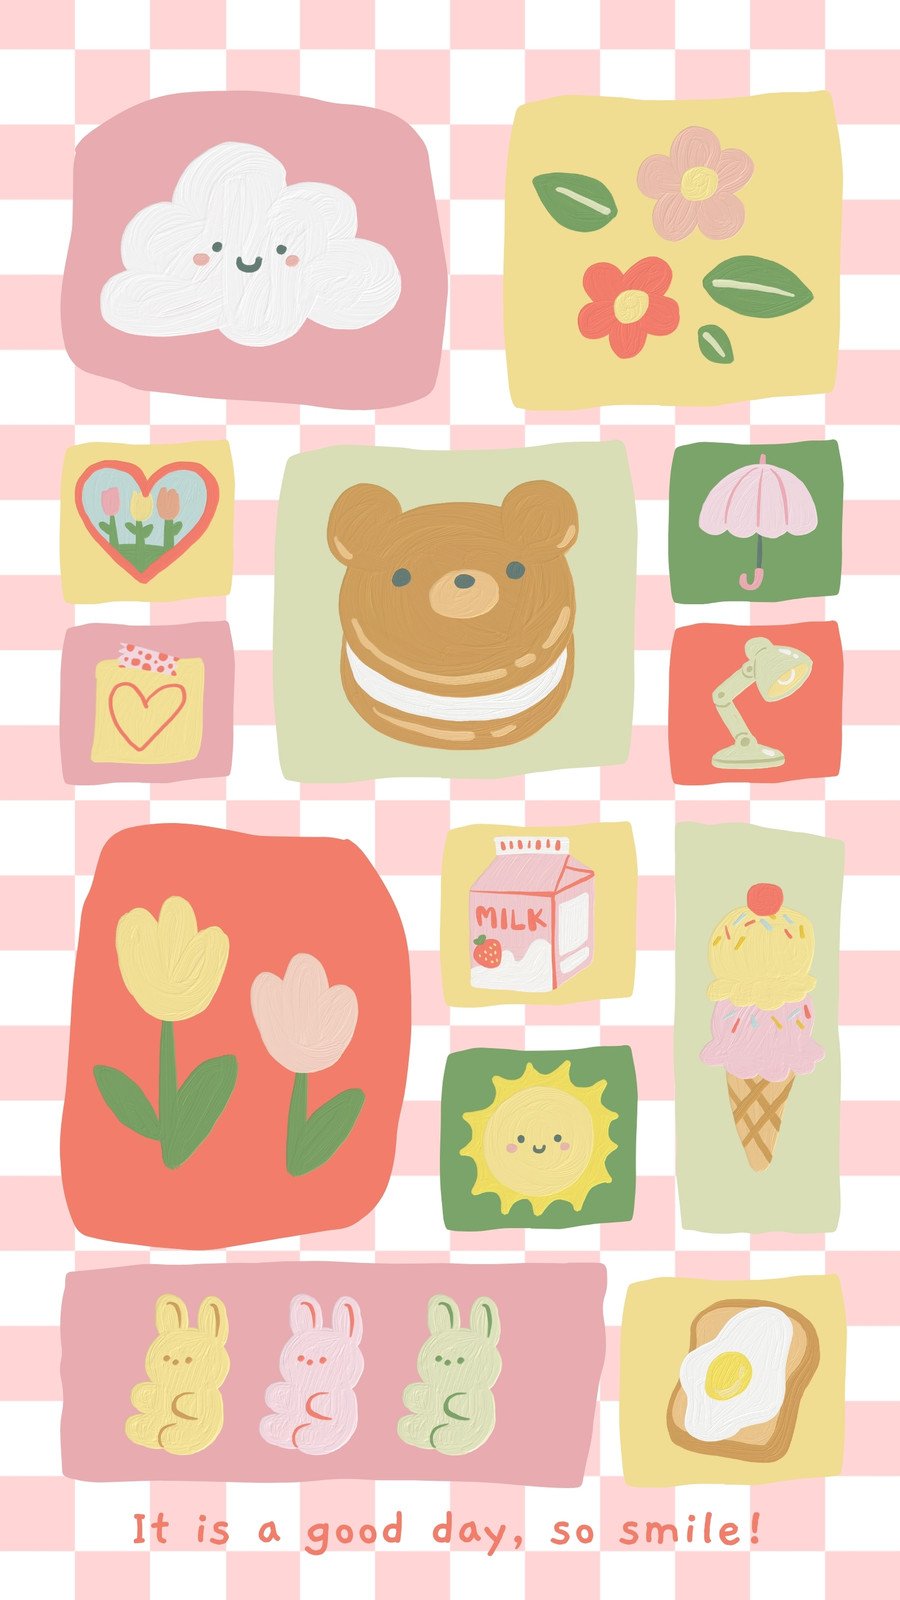 Kawaii Wallpapers Cute on the App Store